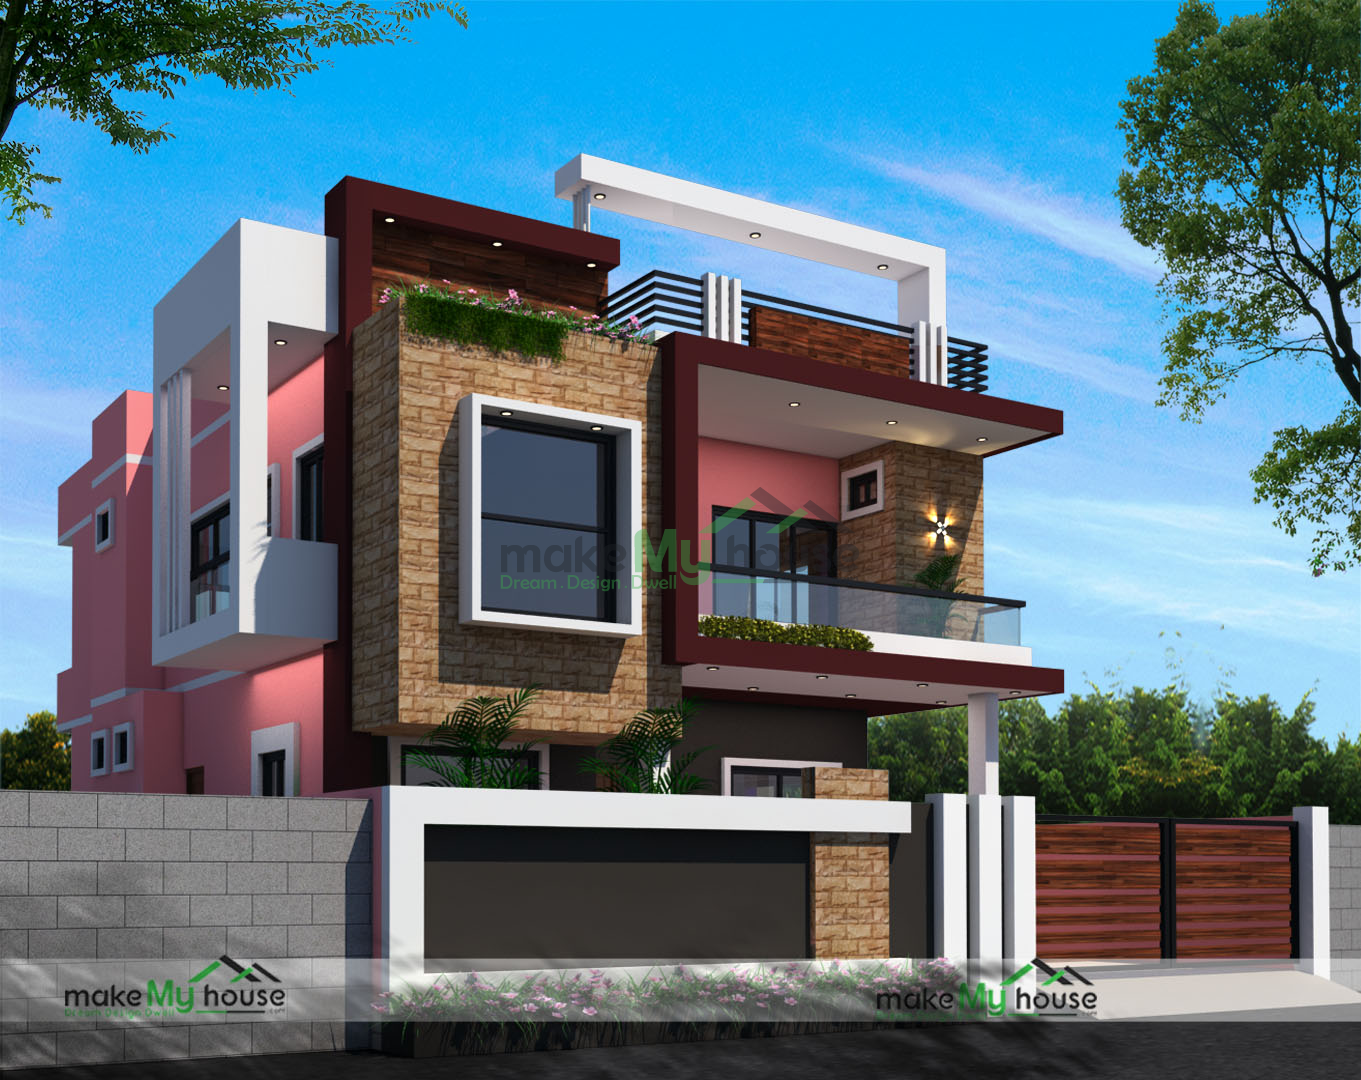 How can I get sample 5 BHK indian type house plans?